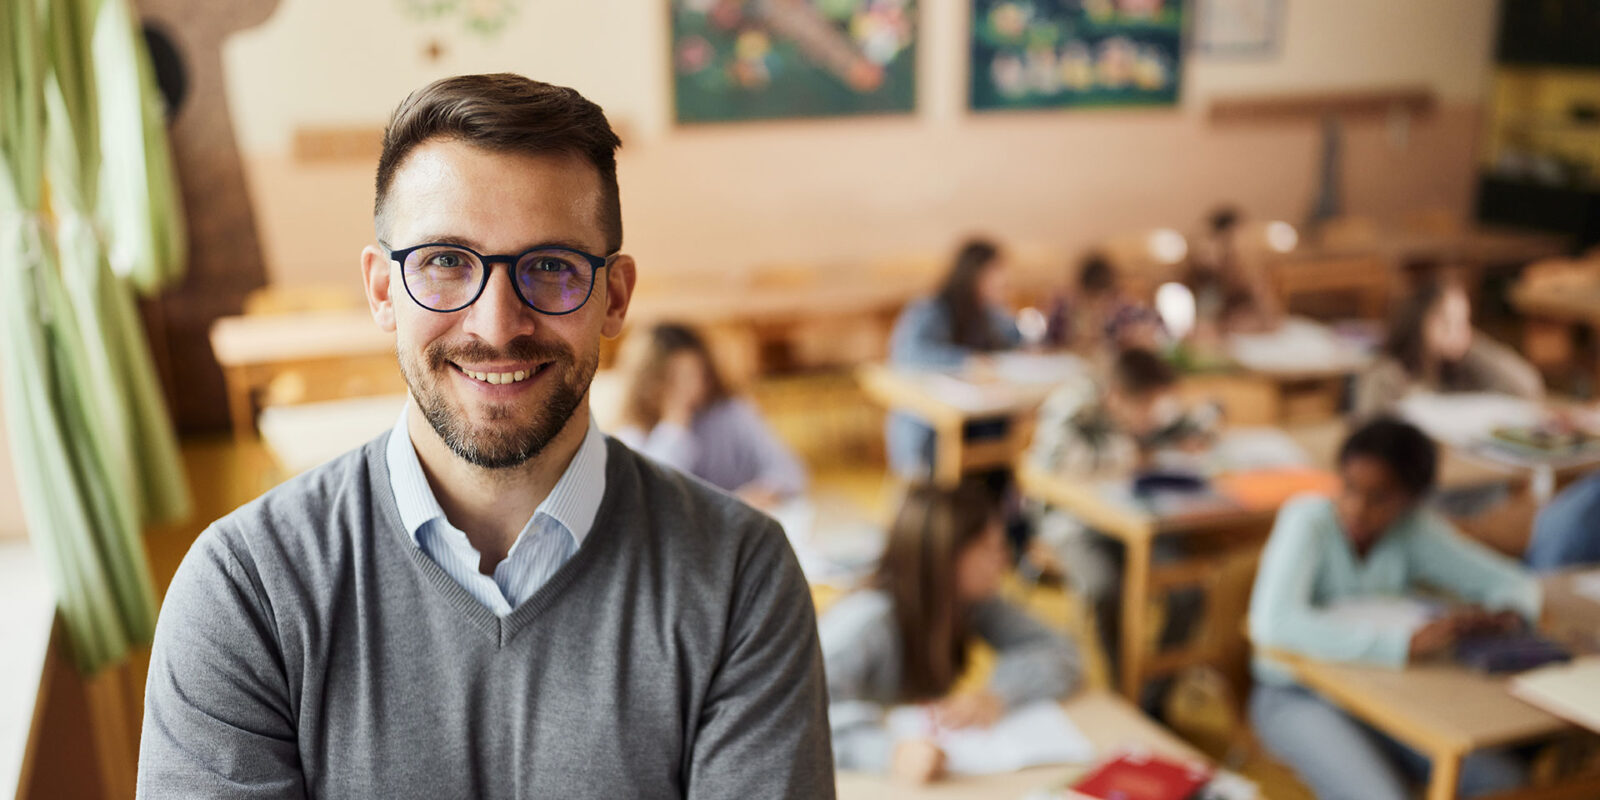 Teacher in glasses smiling in front of class of students